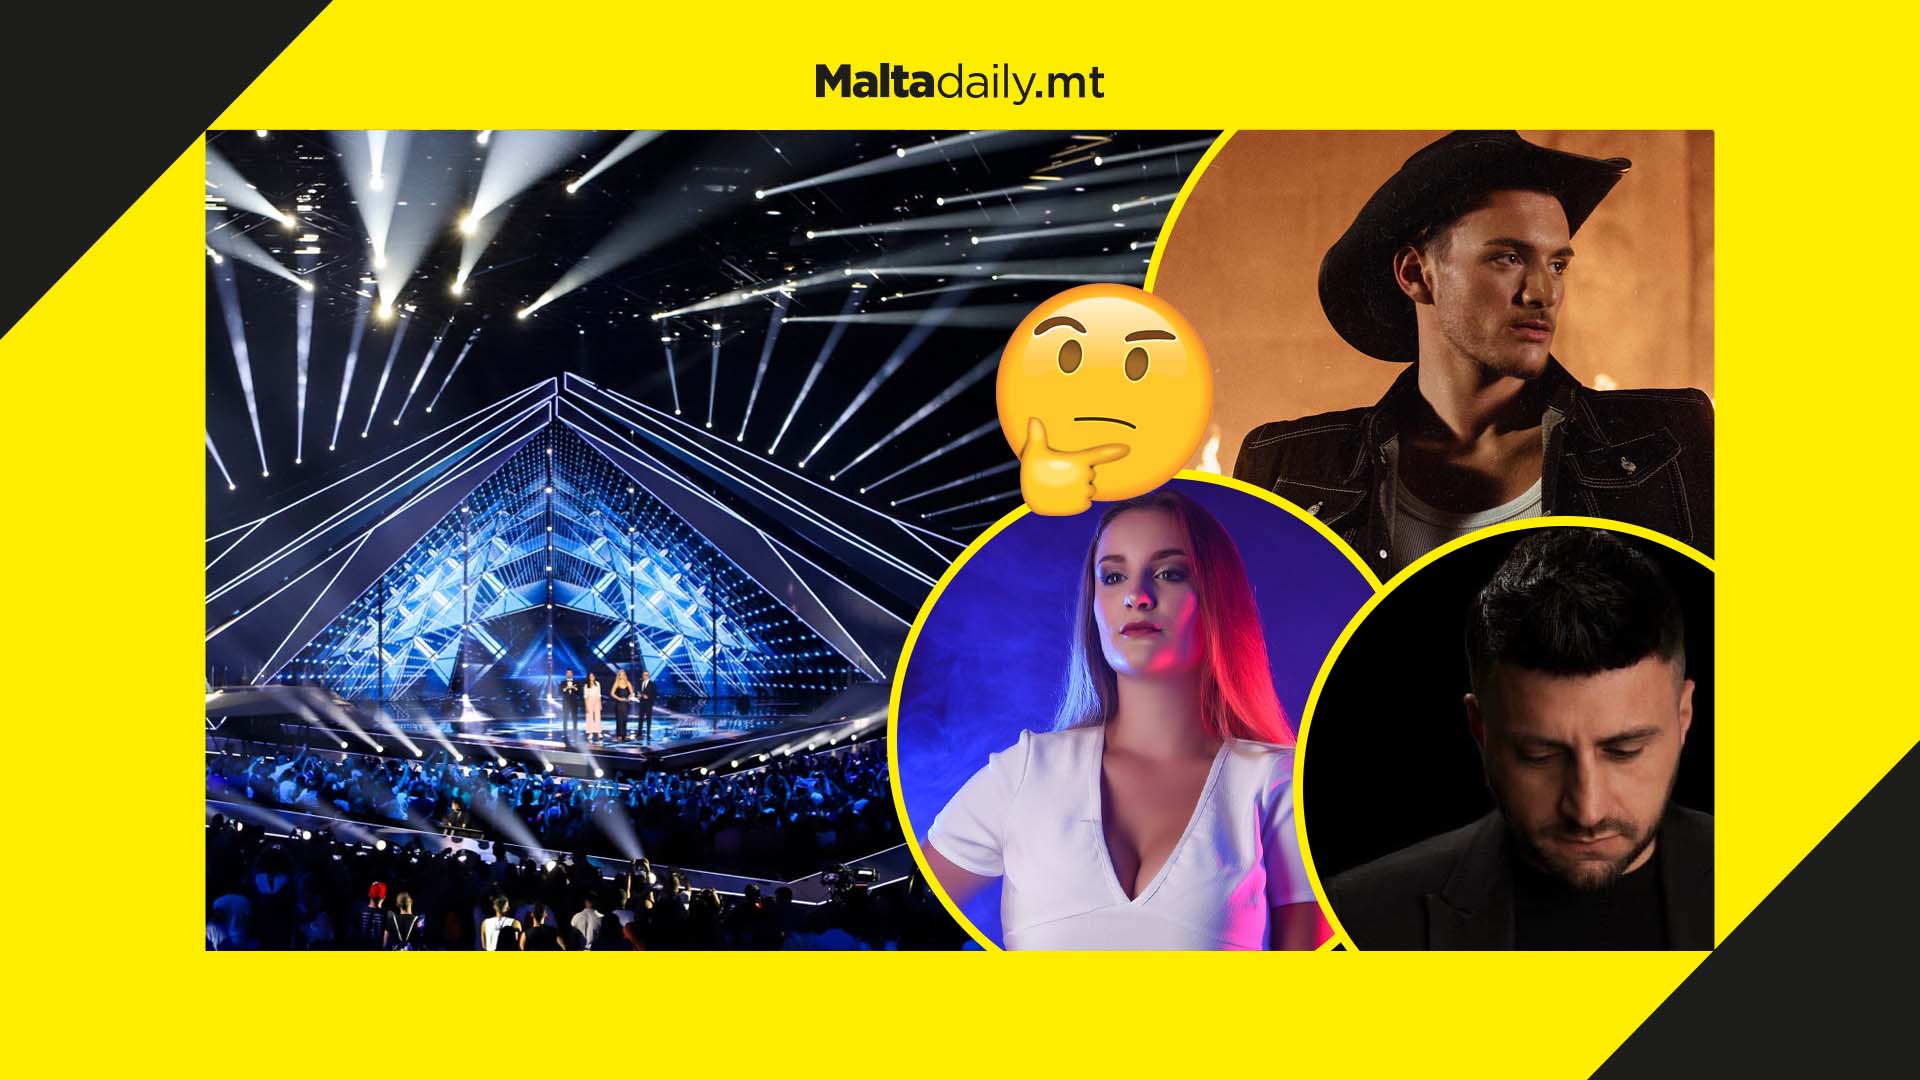 Should we send a Maltese song to the Eurovision Song Contest in Turin?